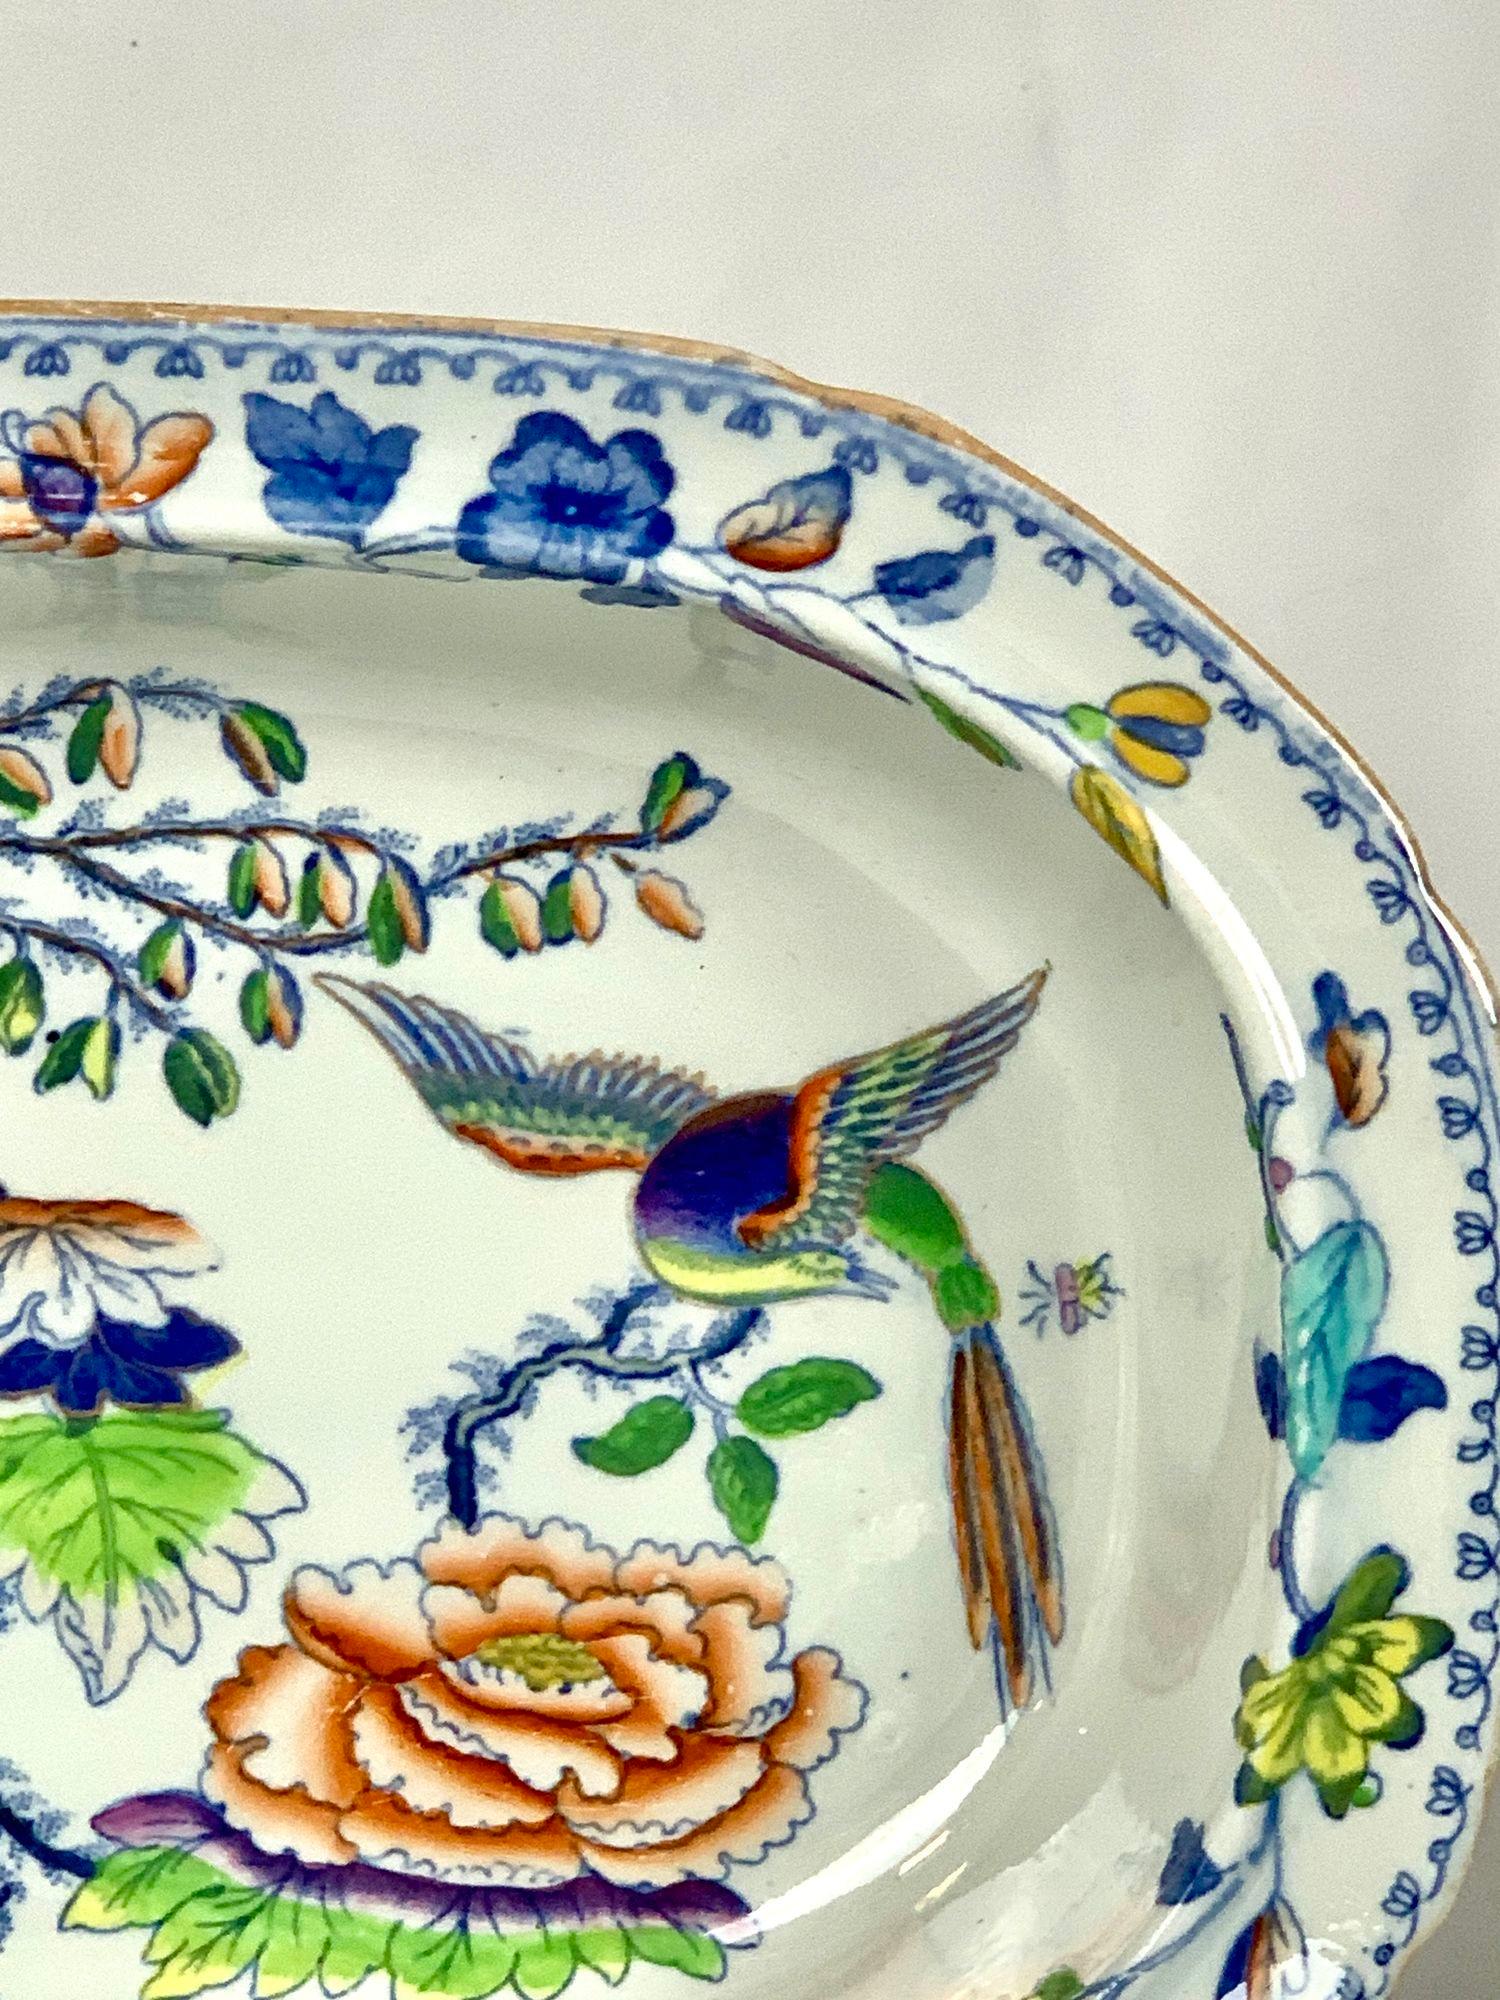 This oval bowl in the gorgeous Flying Bird pattern has everything you want in a colorful pattern: a beautiful bird and flowers painted in rainbow colors.
The colors are an unexpected combination of purple, pink, yellow, orange, deep cobalt blue, and